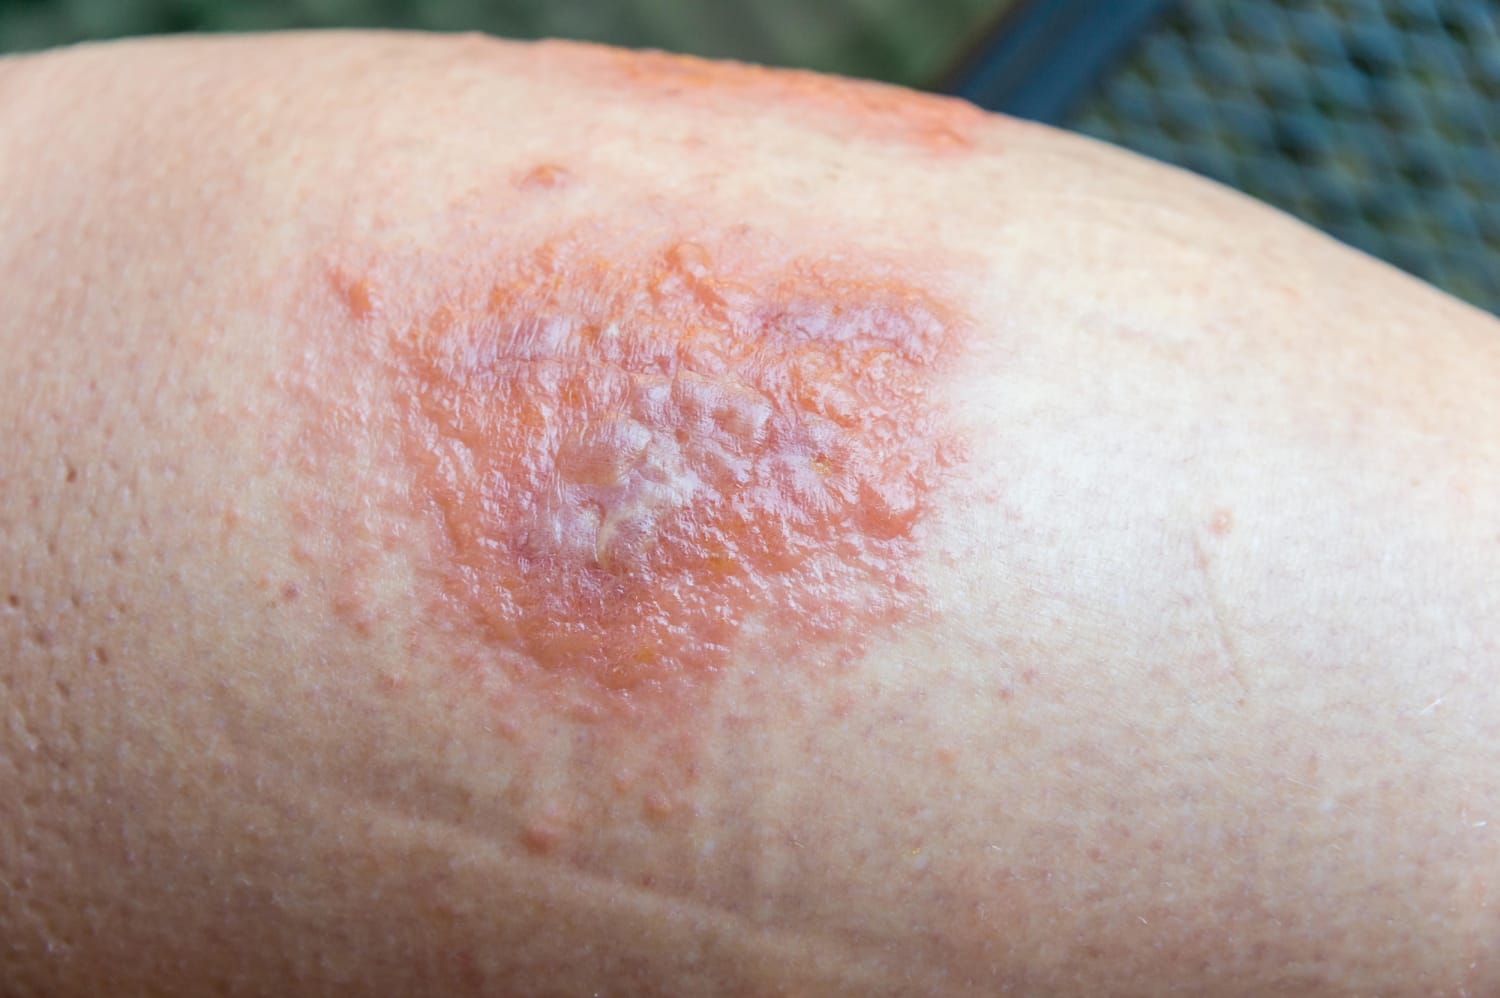 Identifying Insect Bites